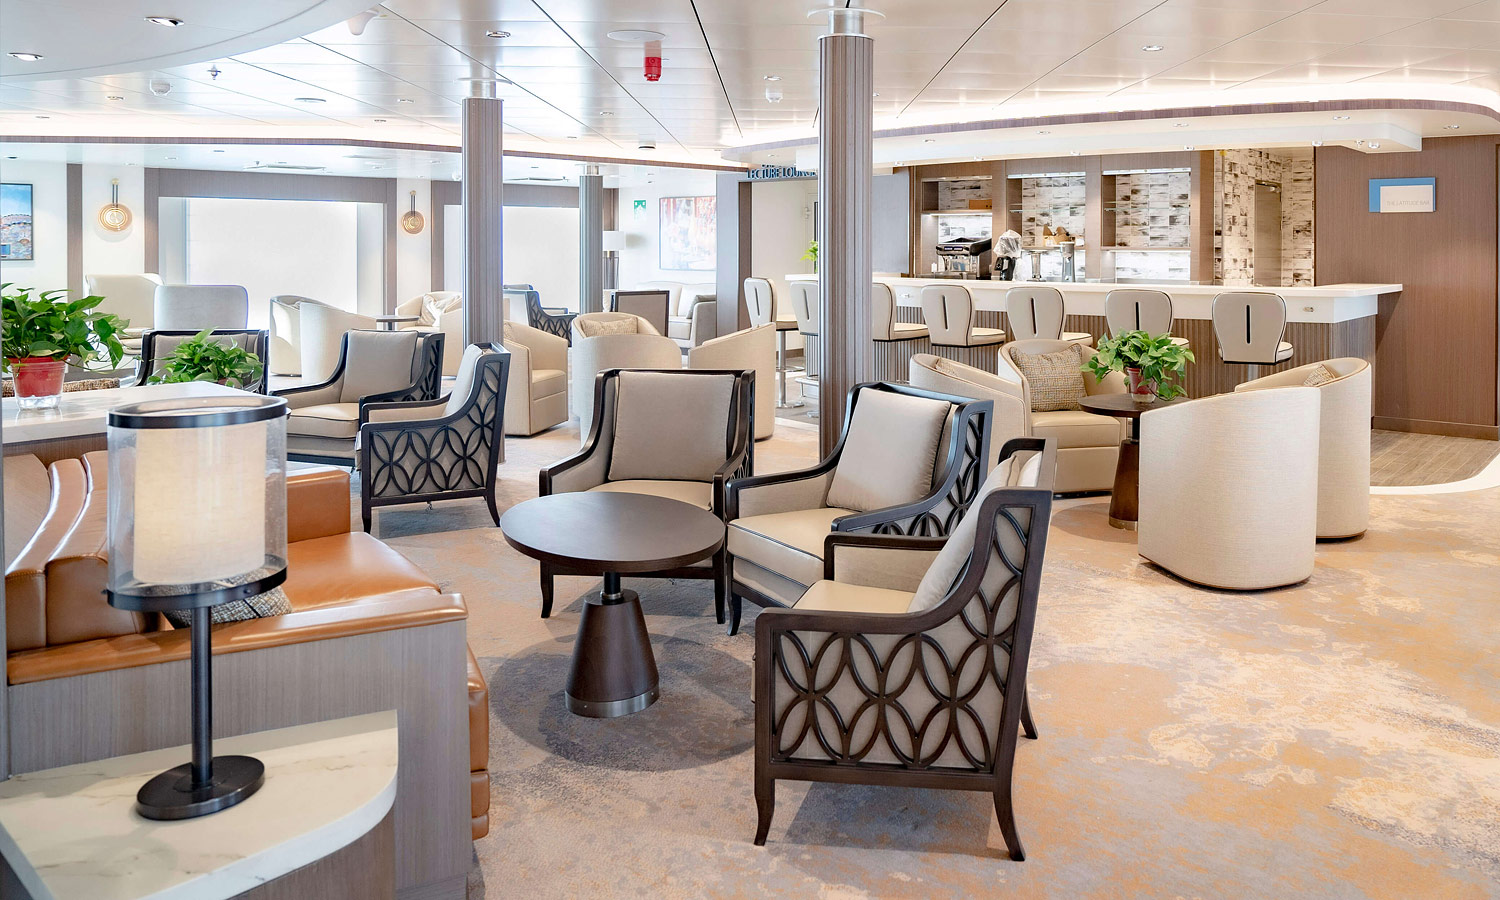 A lounge room with bar, tables and chairs on a luxurious cruise ship.